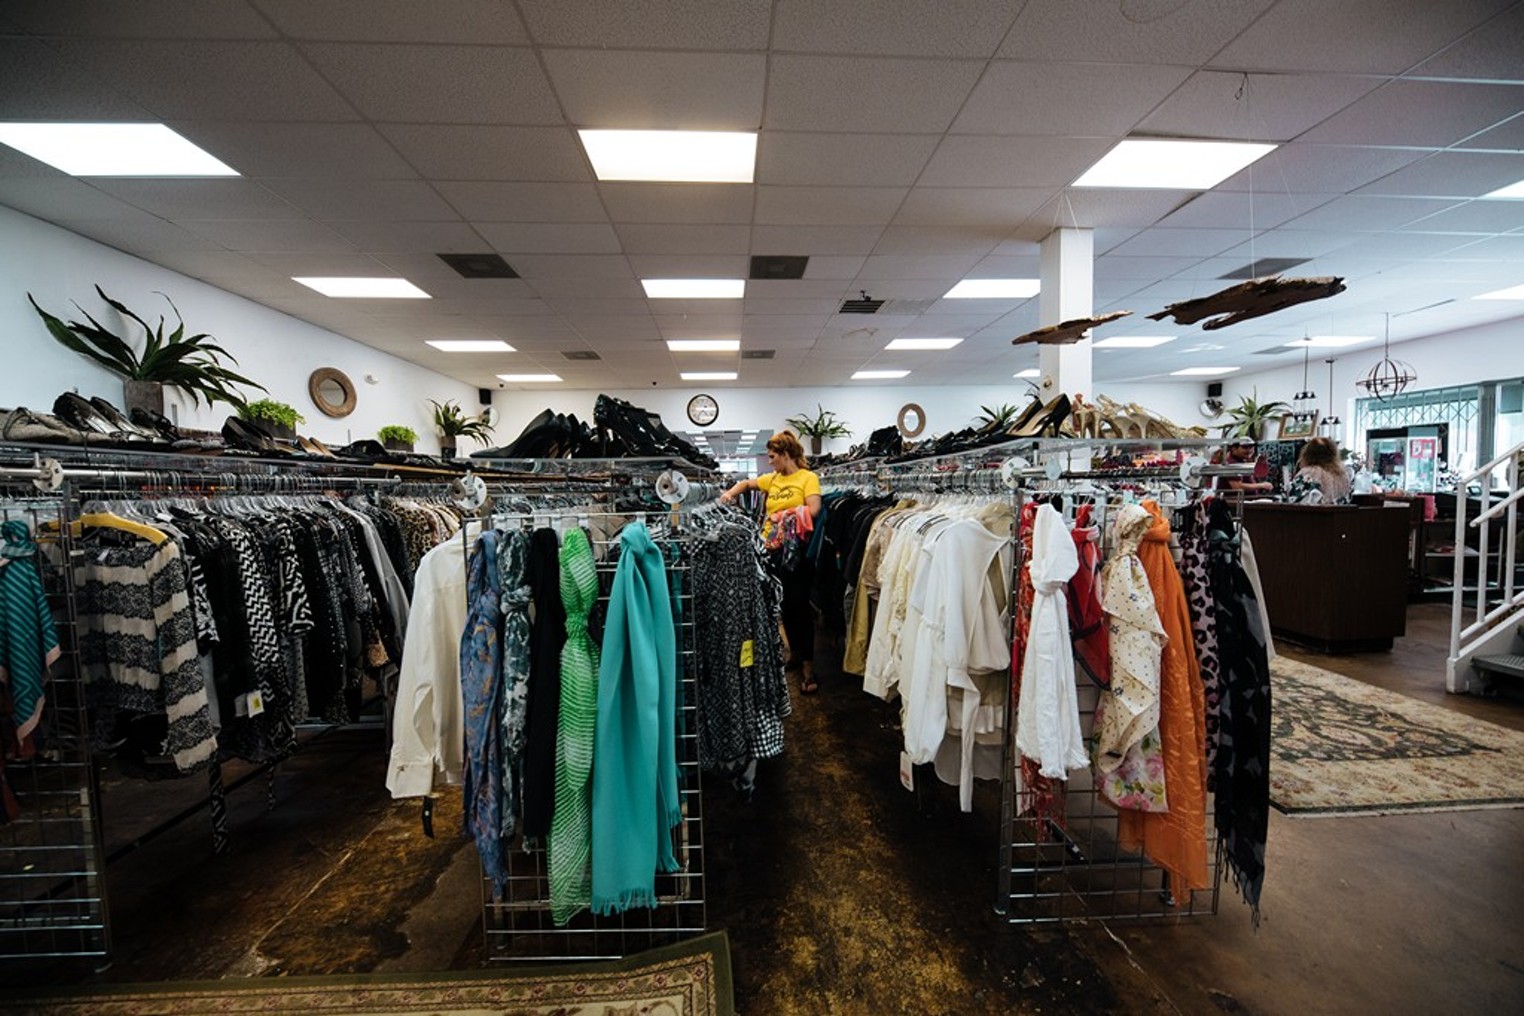 Best Charity Thrift Store 2019, Genesis Benefit Thrift, Best of Dallas®  2020, Best Restaurants, Bars, Clubs, Music and Stores in Dallas